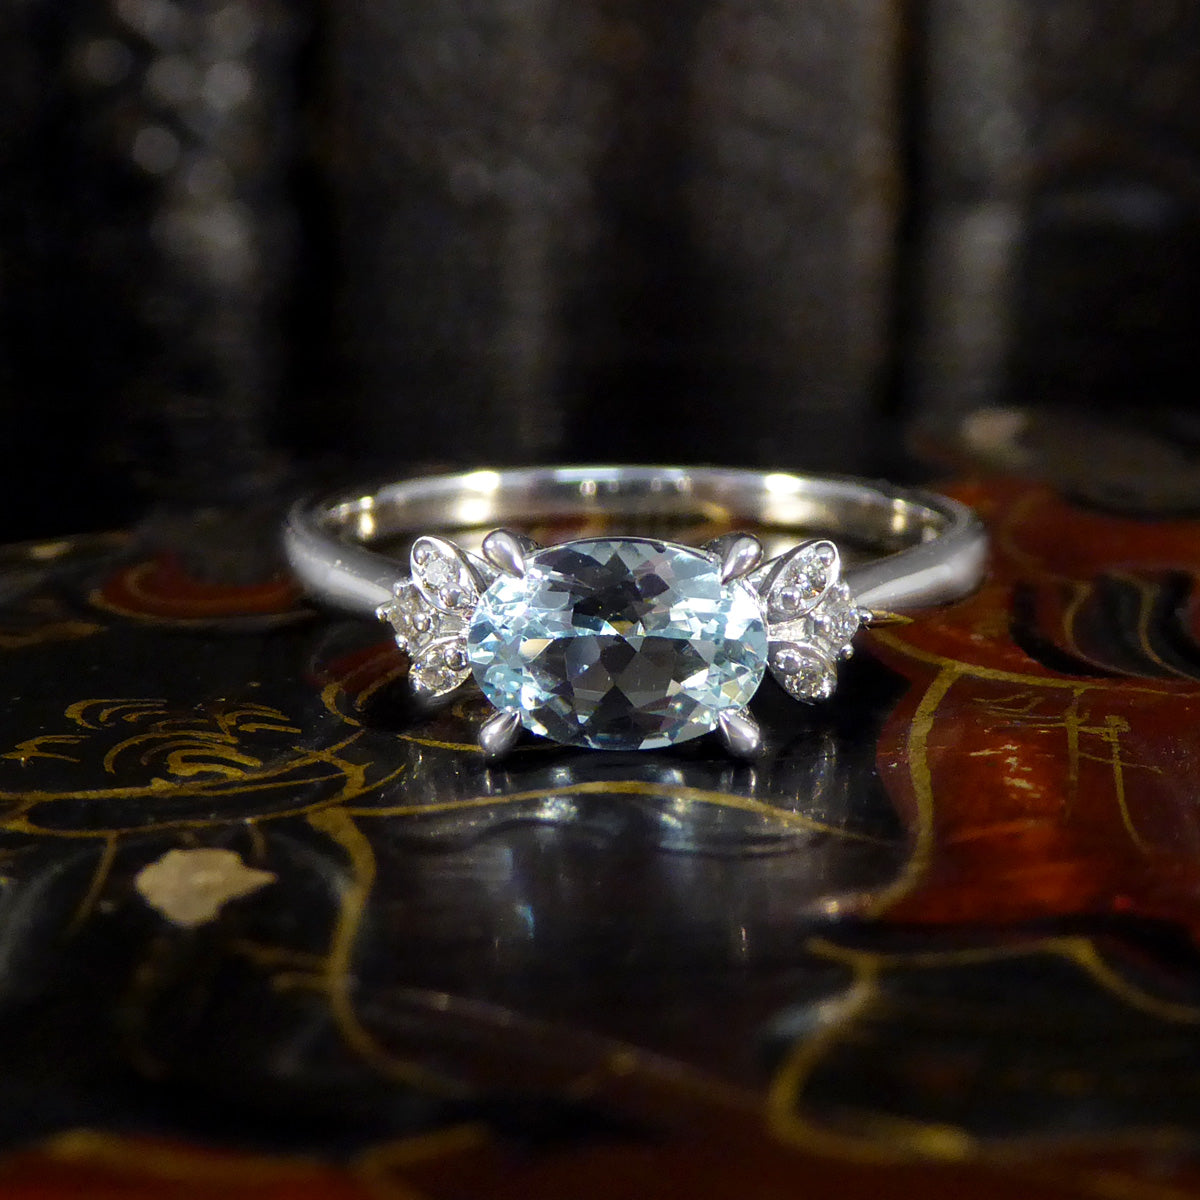 Dainty Aquamarine Ring with Diamond Set Shoulders in White Gold